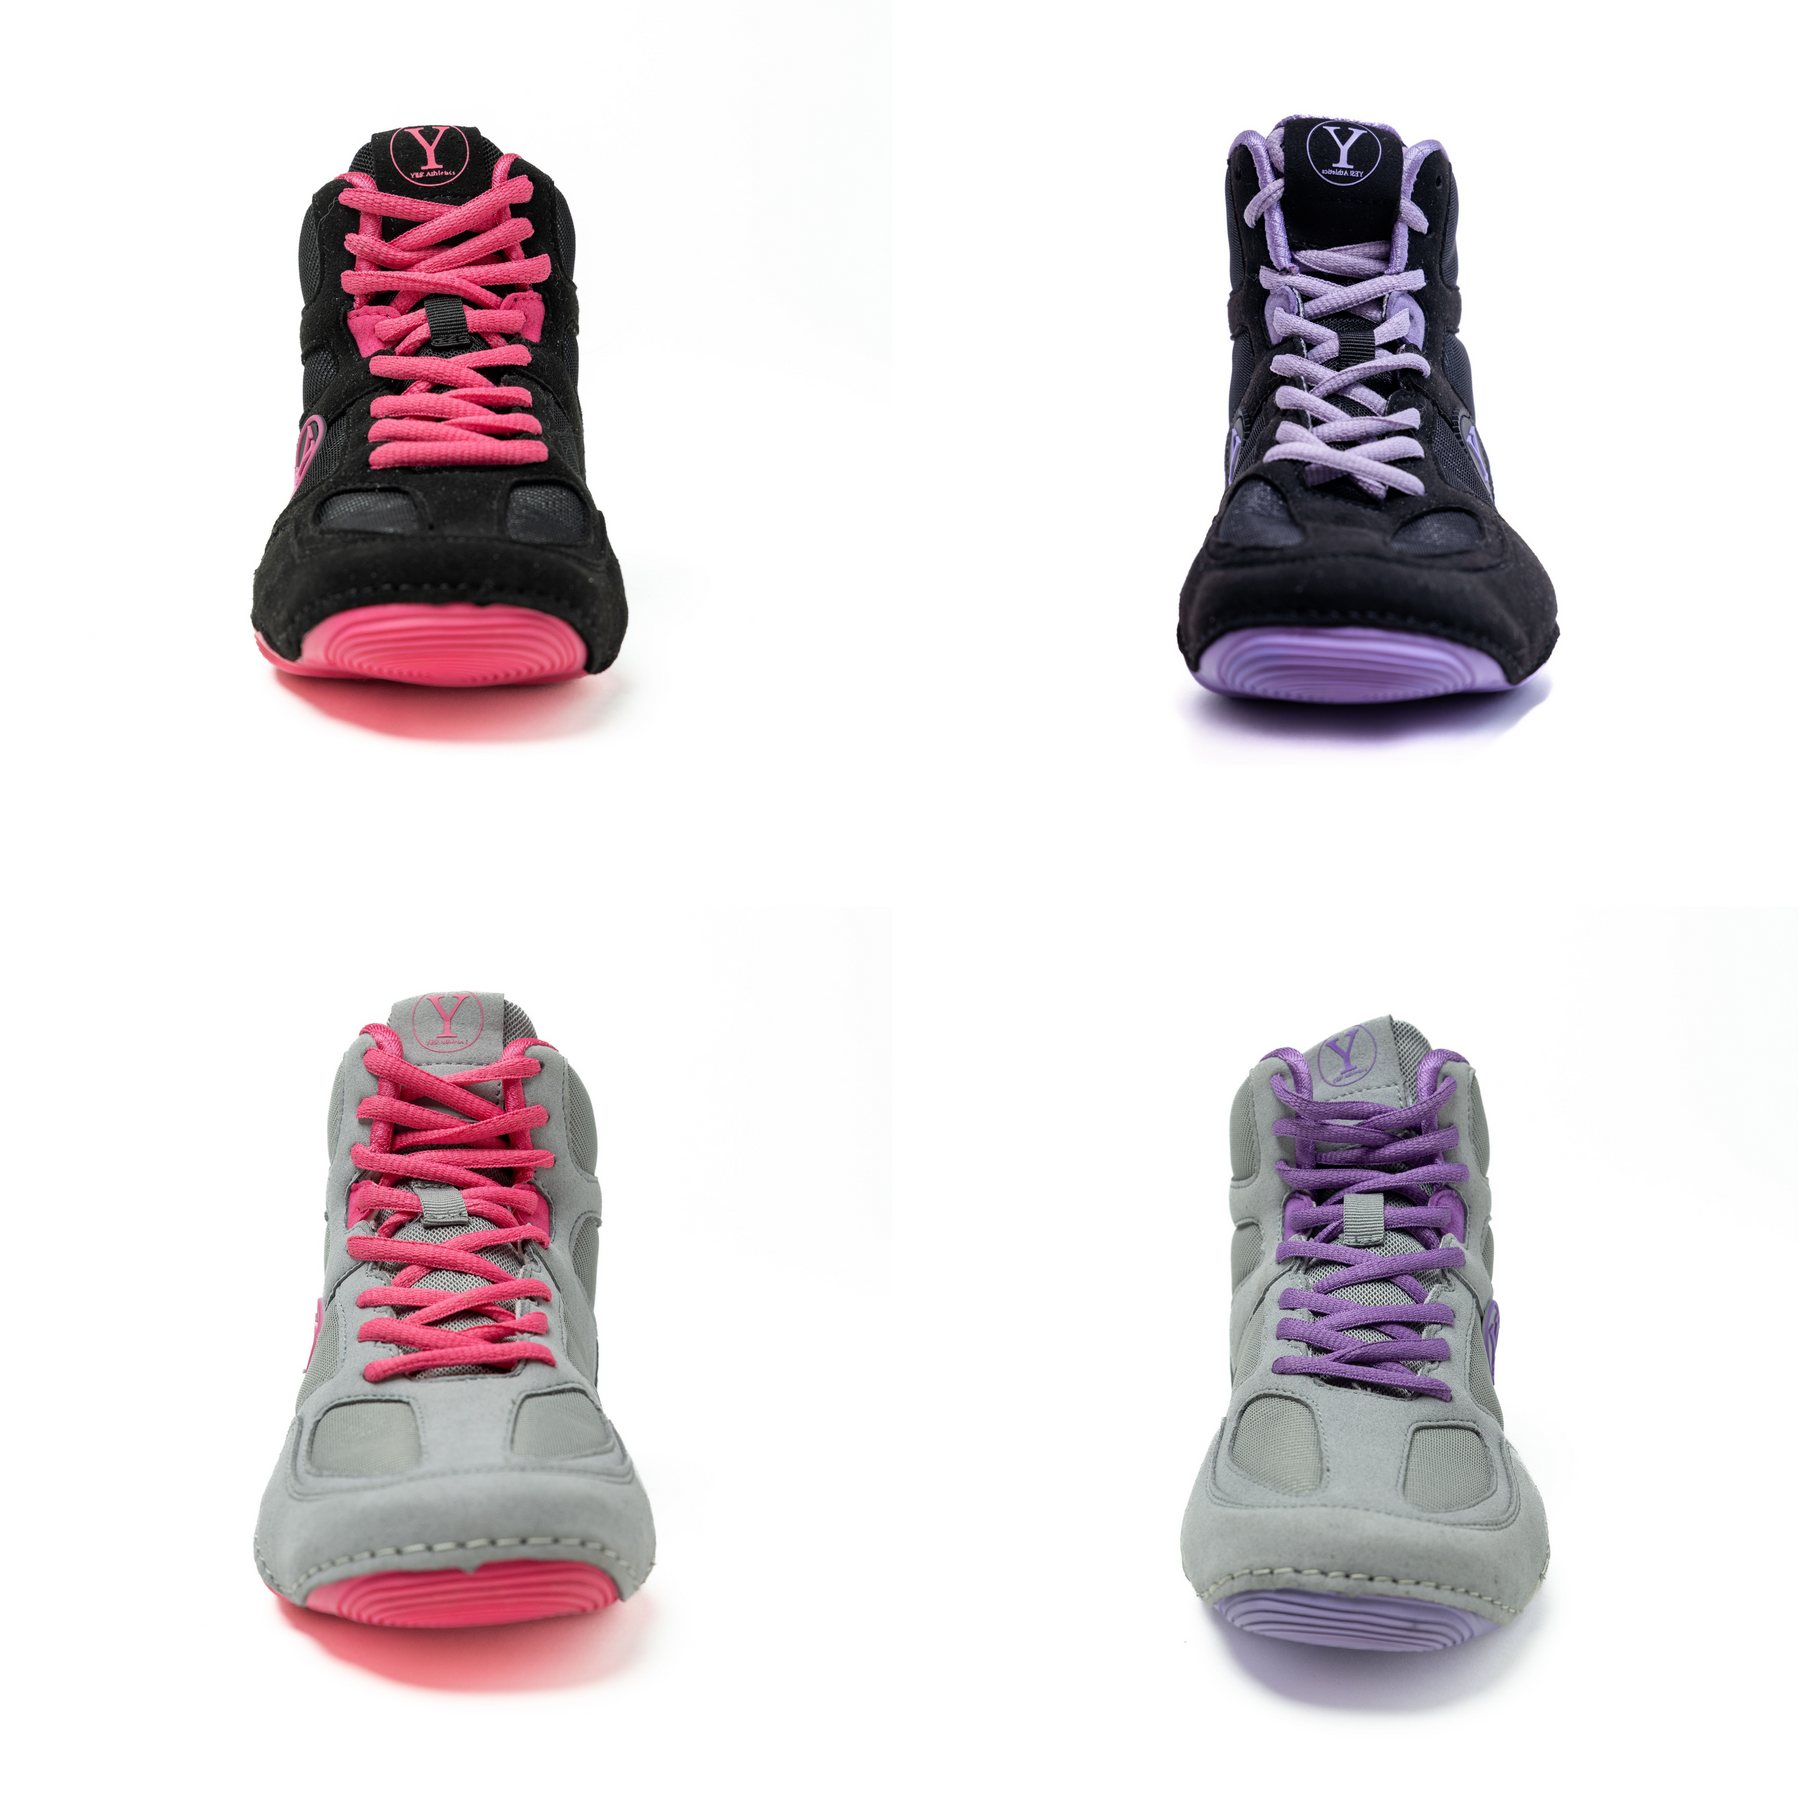 DEFIANT2 - Wrestling Shoes for Youth Girls and Women